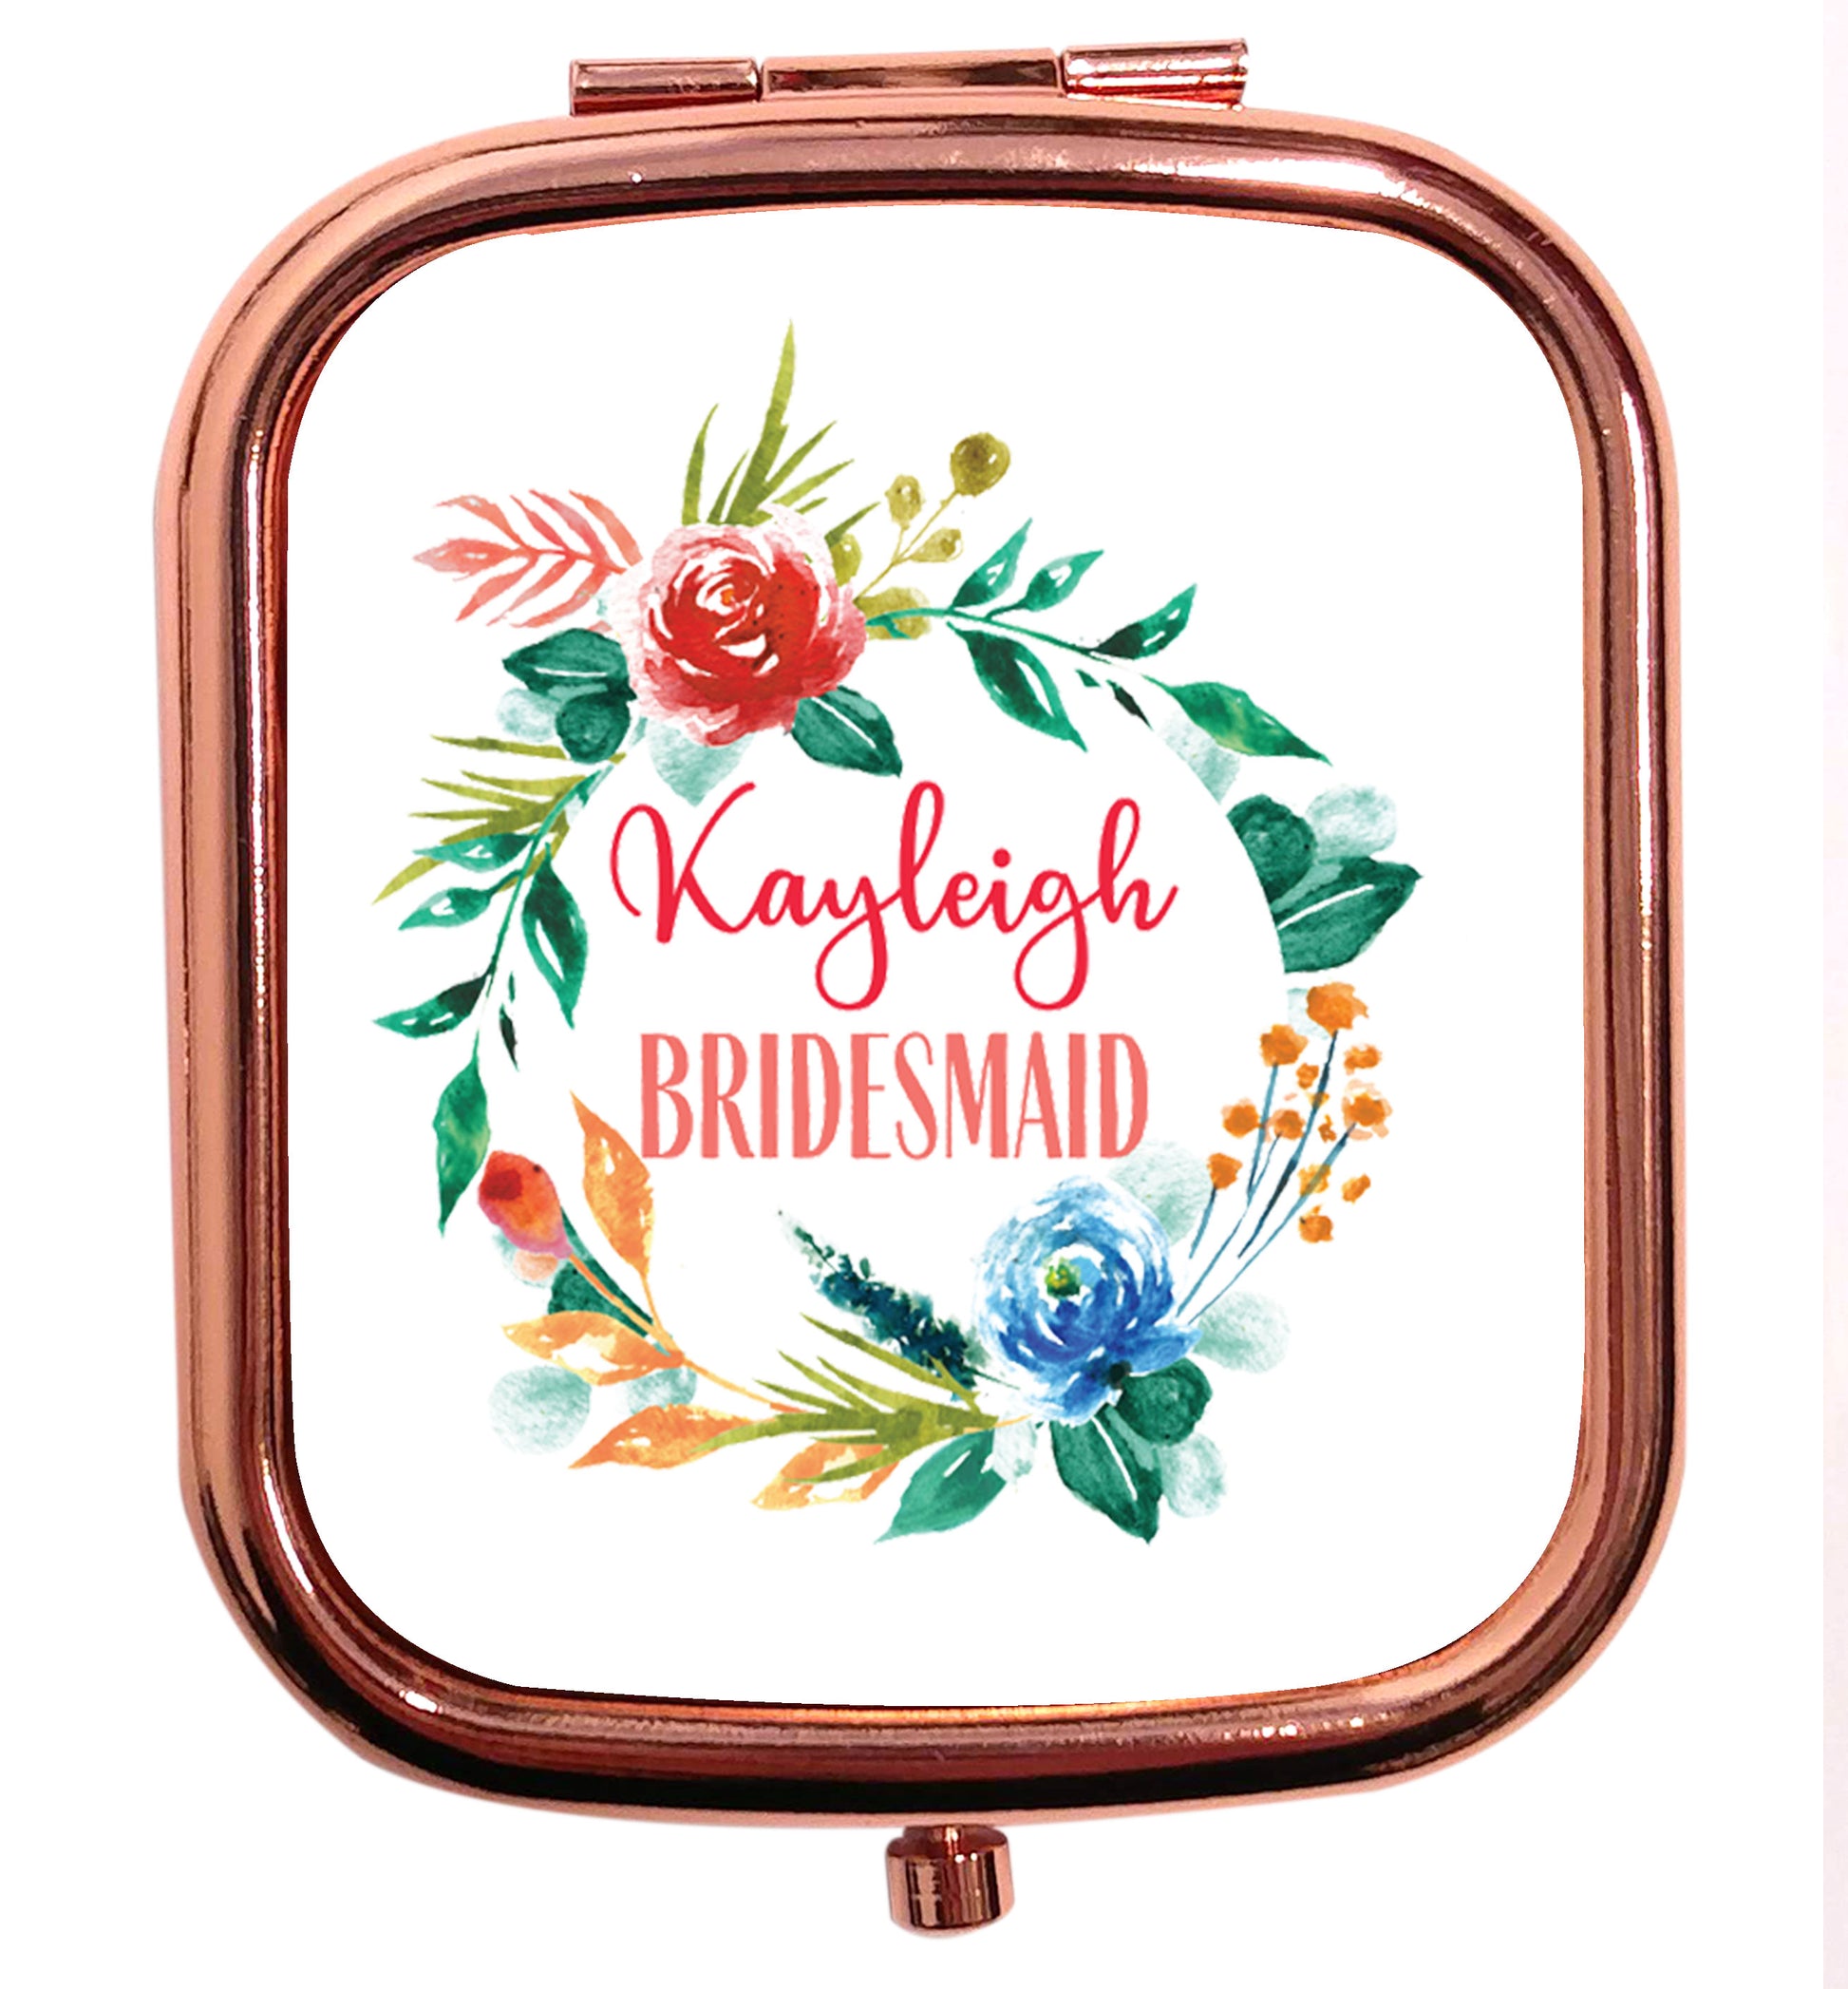 Perfect wedding guest favours or hen party gifts! Personalised bridal floral wreath designs, any name, any role! rose gold square pocket mirror